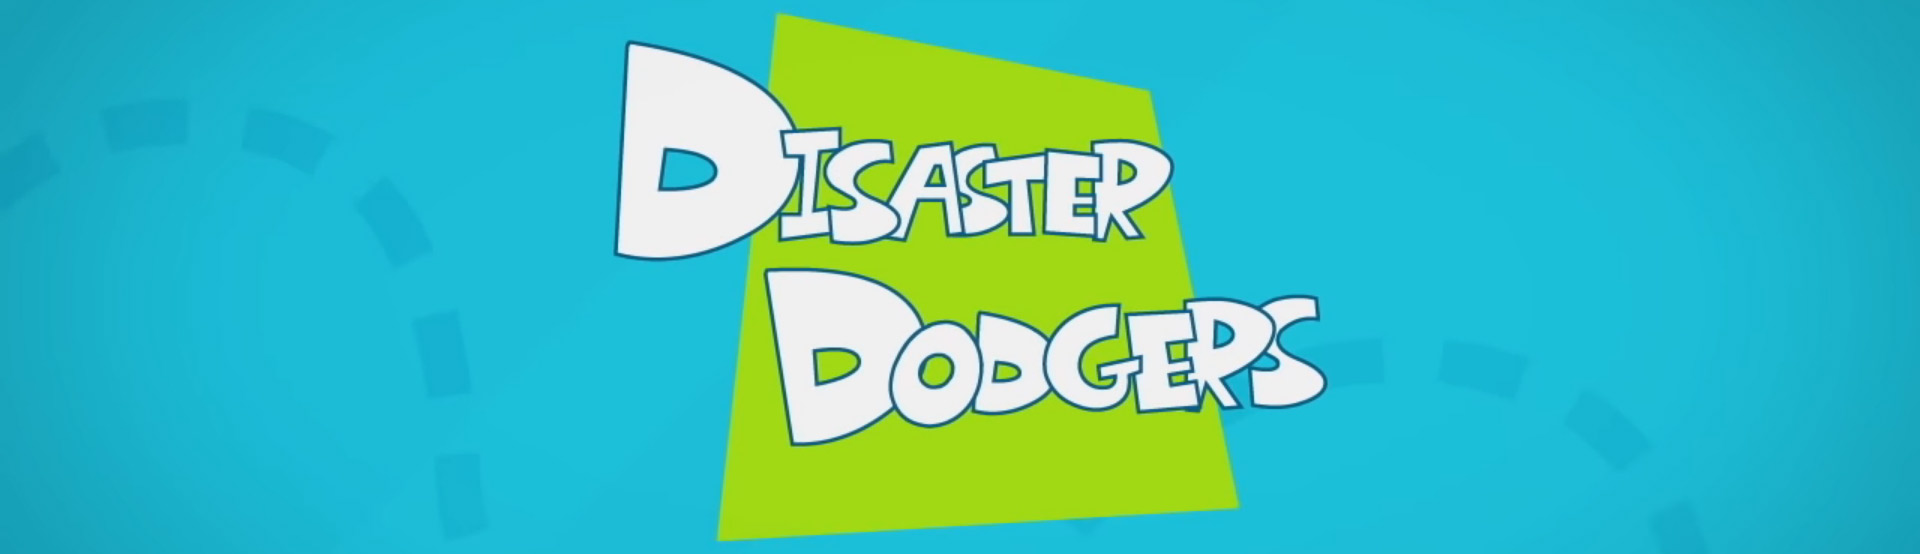 Disaster Dodgers